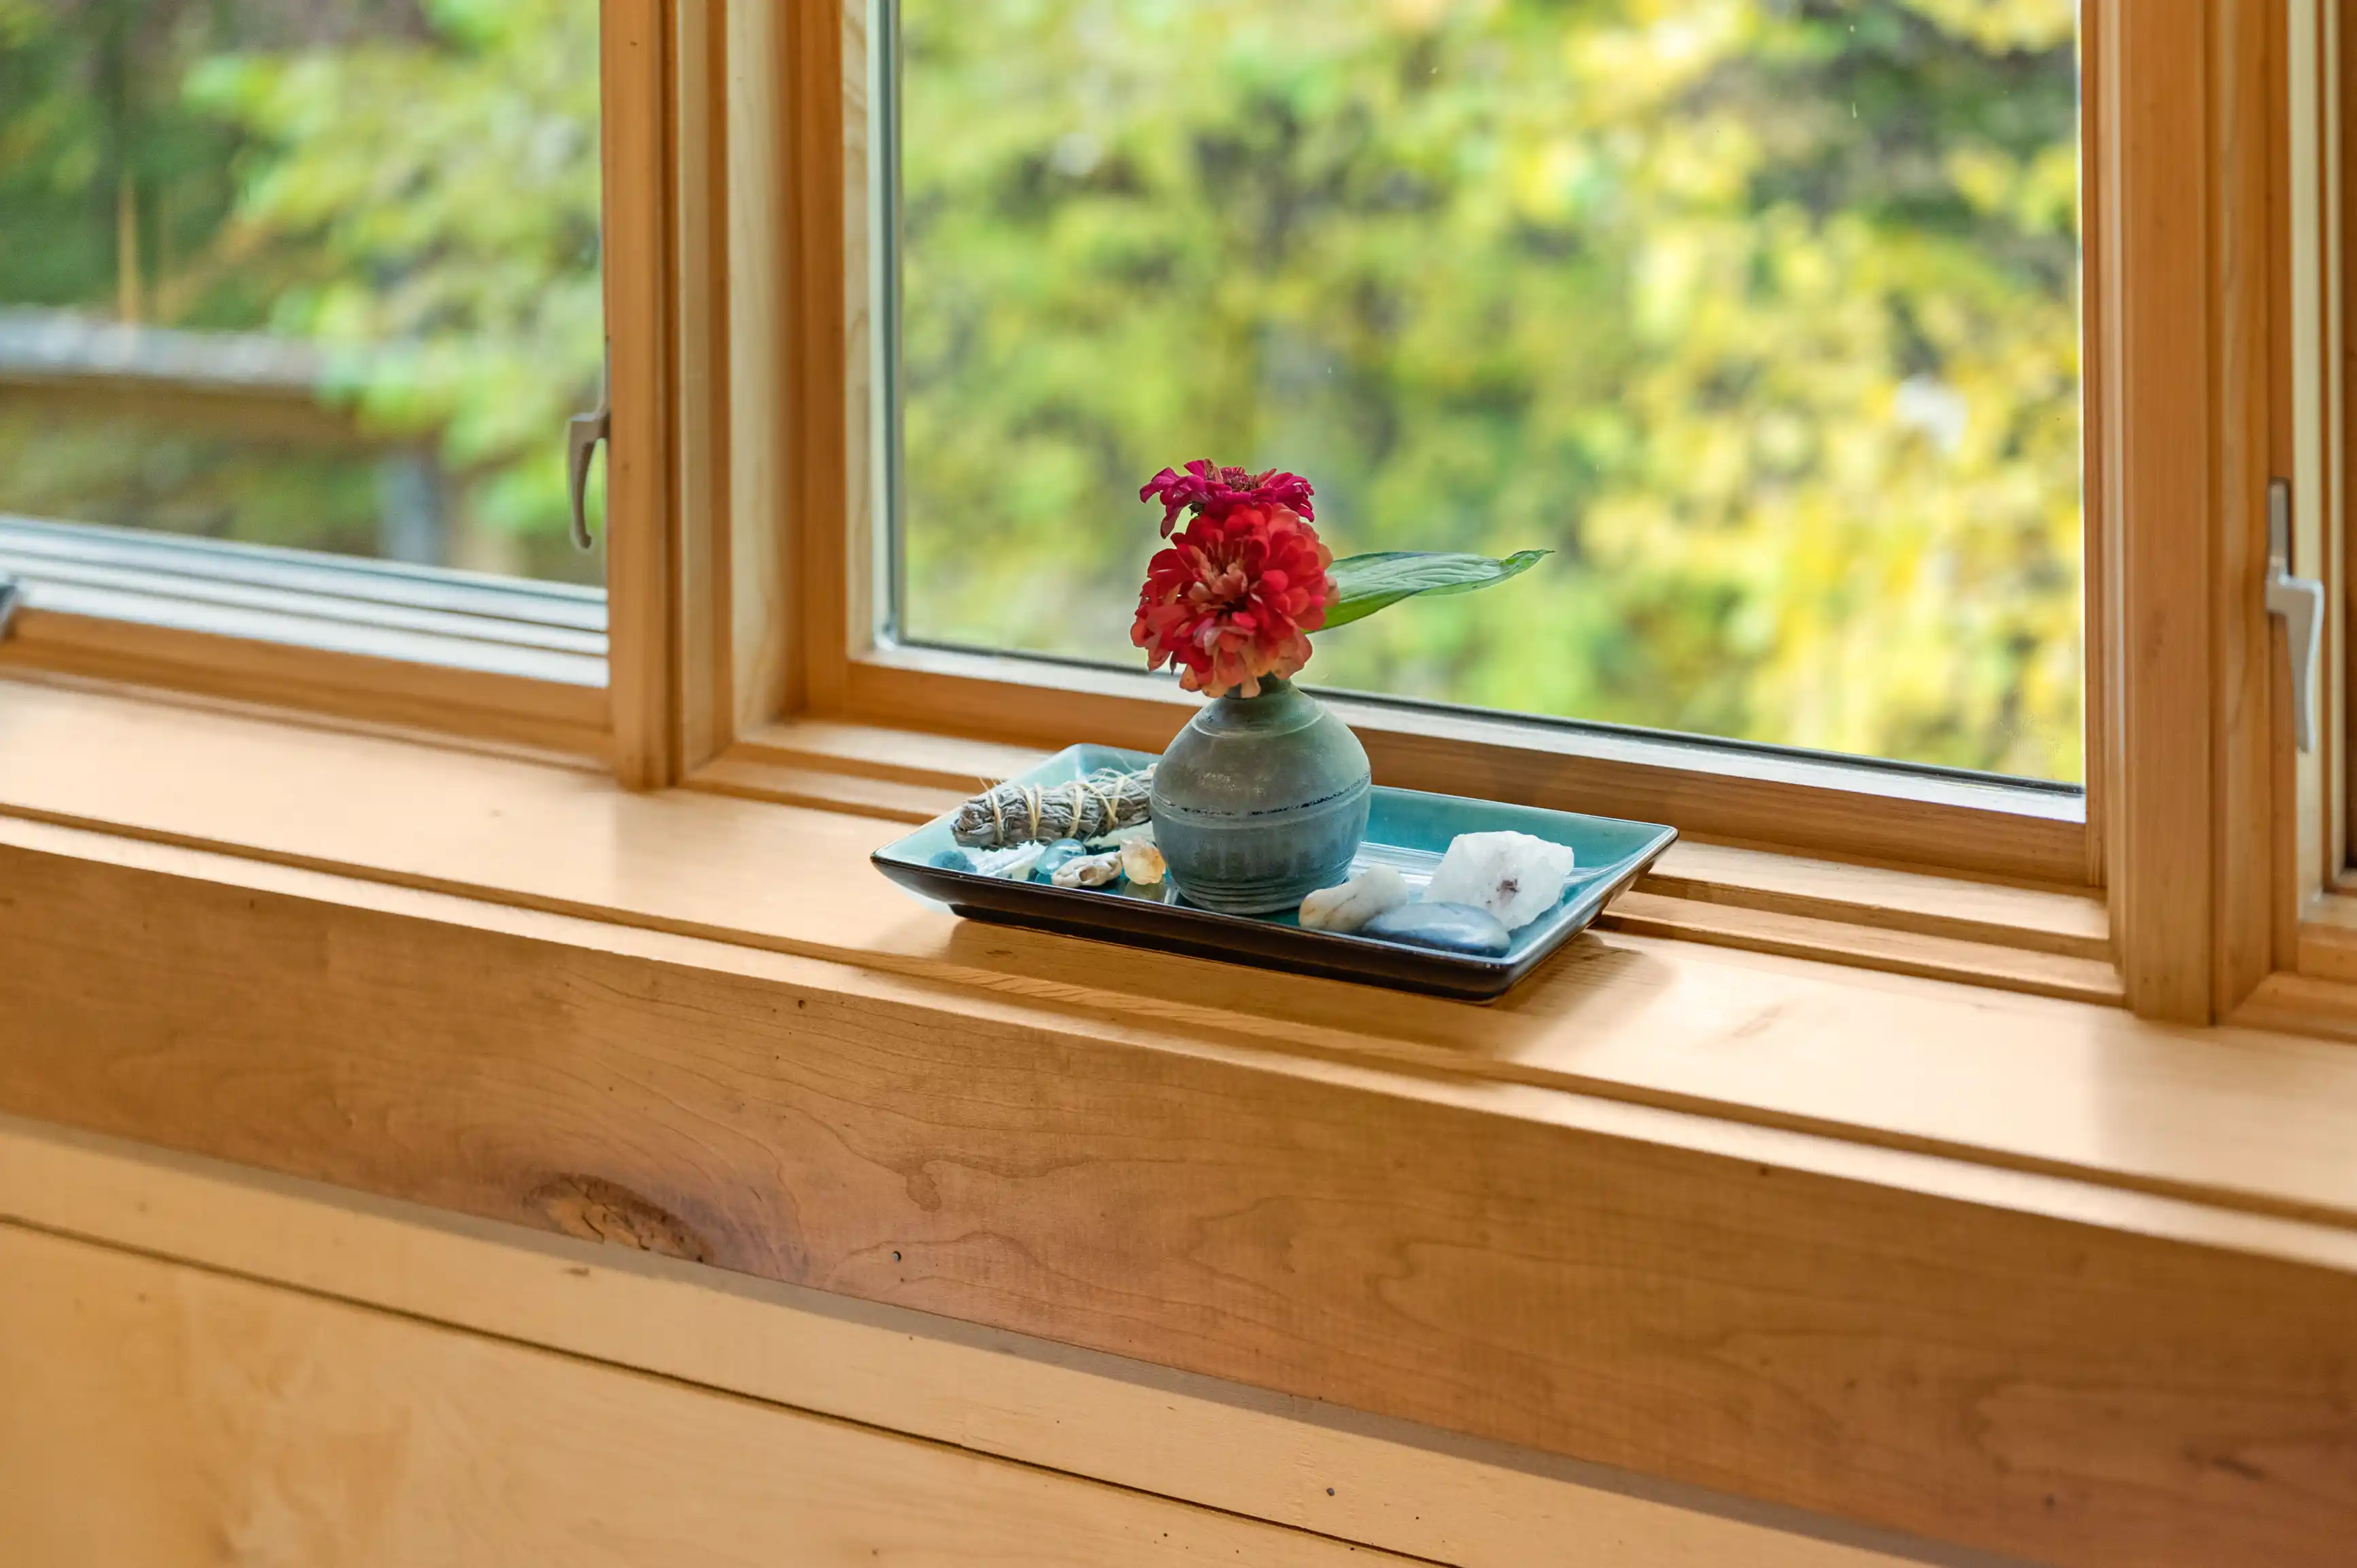 A small vase with a red flower and some stones on a blue tray by a wooden window, with a lush greenery view outside.